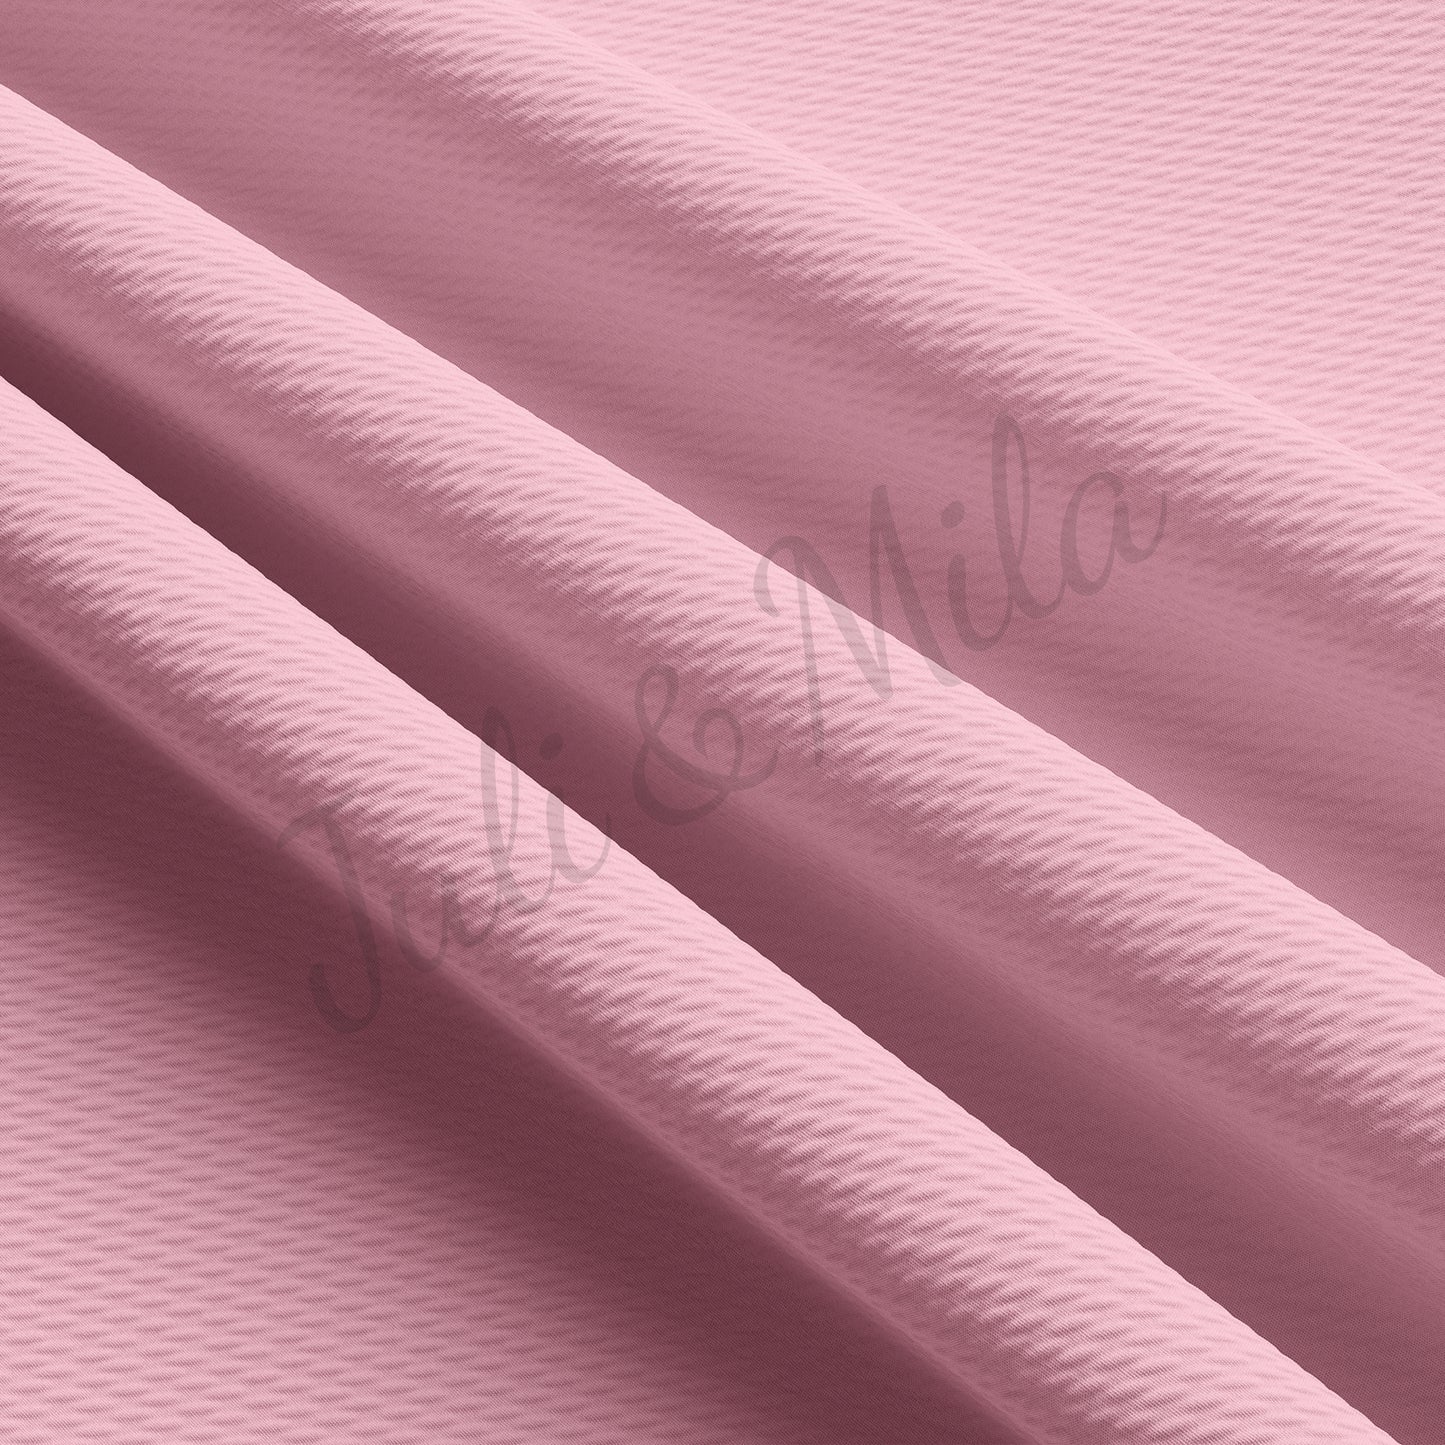 Powder Pink Liverpool Bullet Textured Fabric